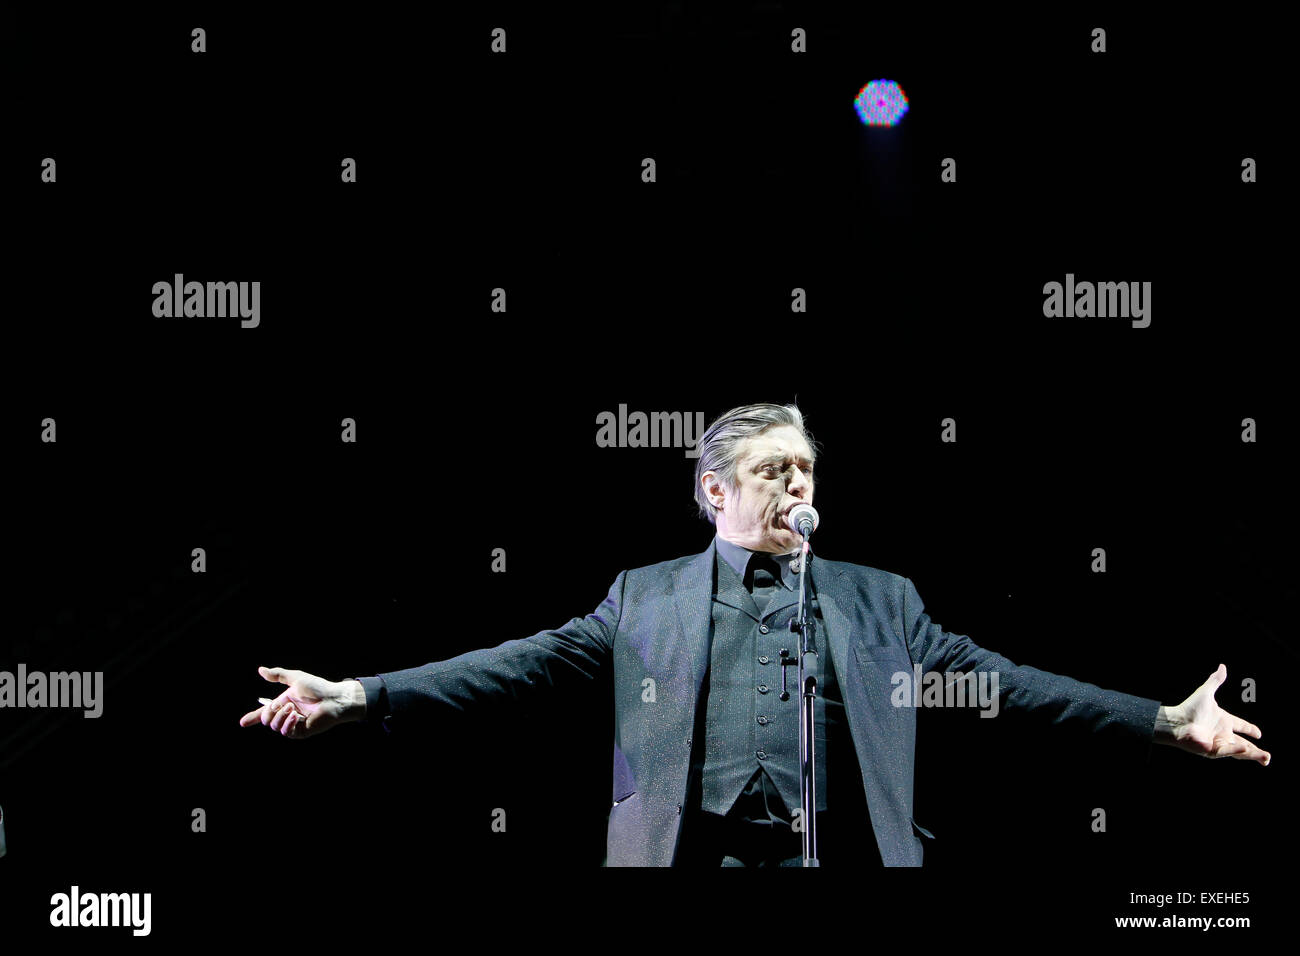 Singer Blixa Bargeld from German music band Einsturzende Neubauten performs at the Open air music festival Pohoda in Trencin, Slovakia on July 10, 2015. (CTK Photo/Peter Jakab) Stock Photo